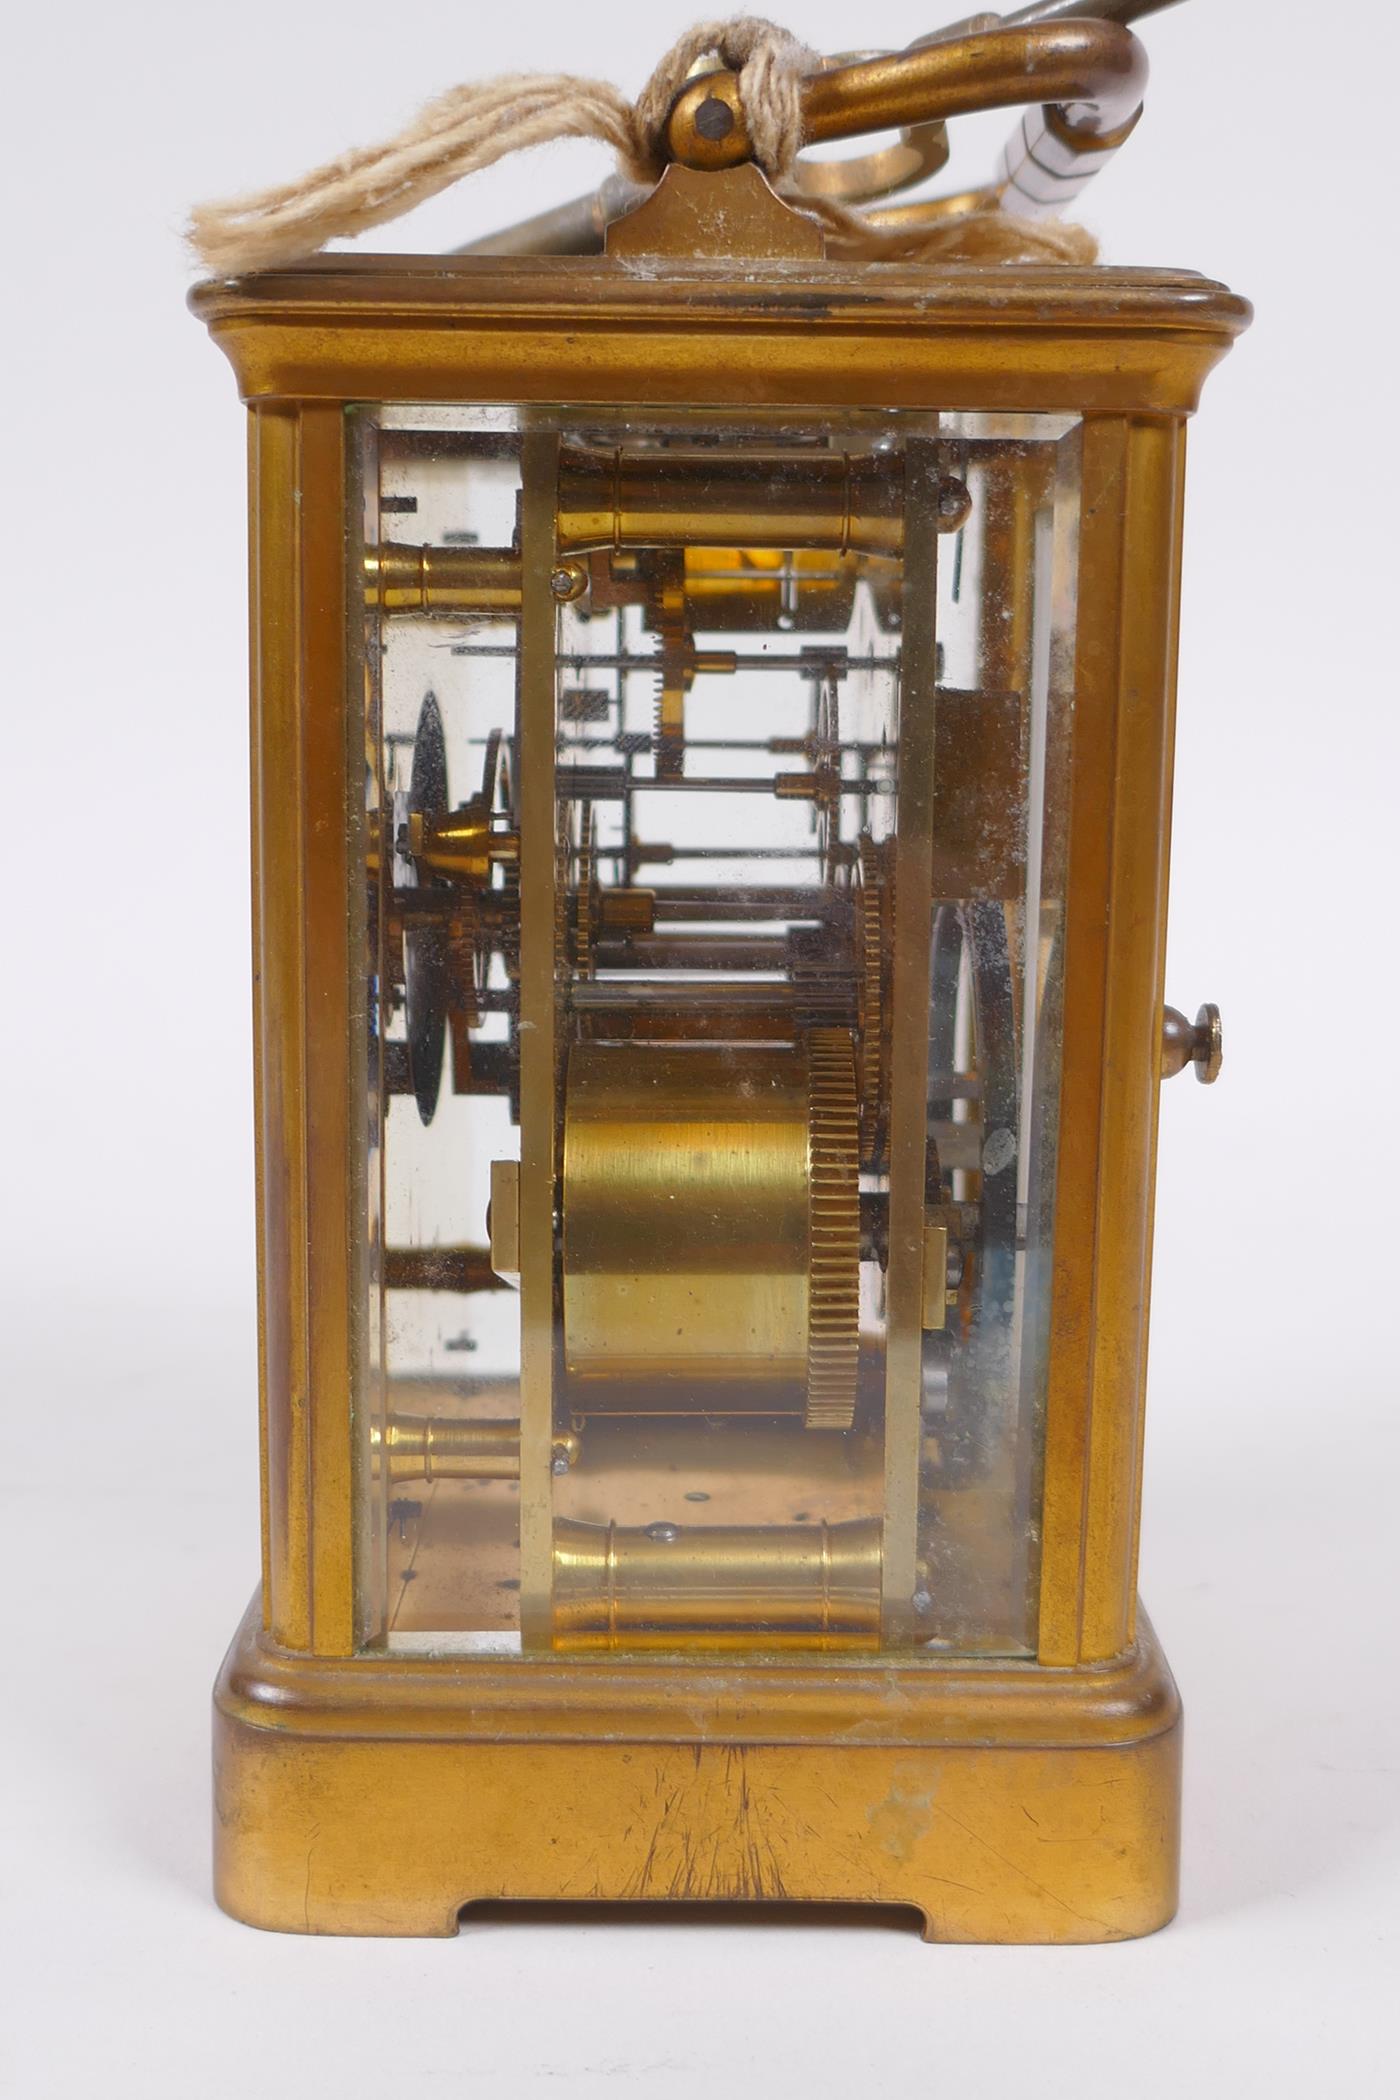 An early C20th French brass carriage clock striking on a gong by Richard & Cie,9 x 8cm, 14cm high - Image 6 of 6